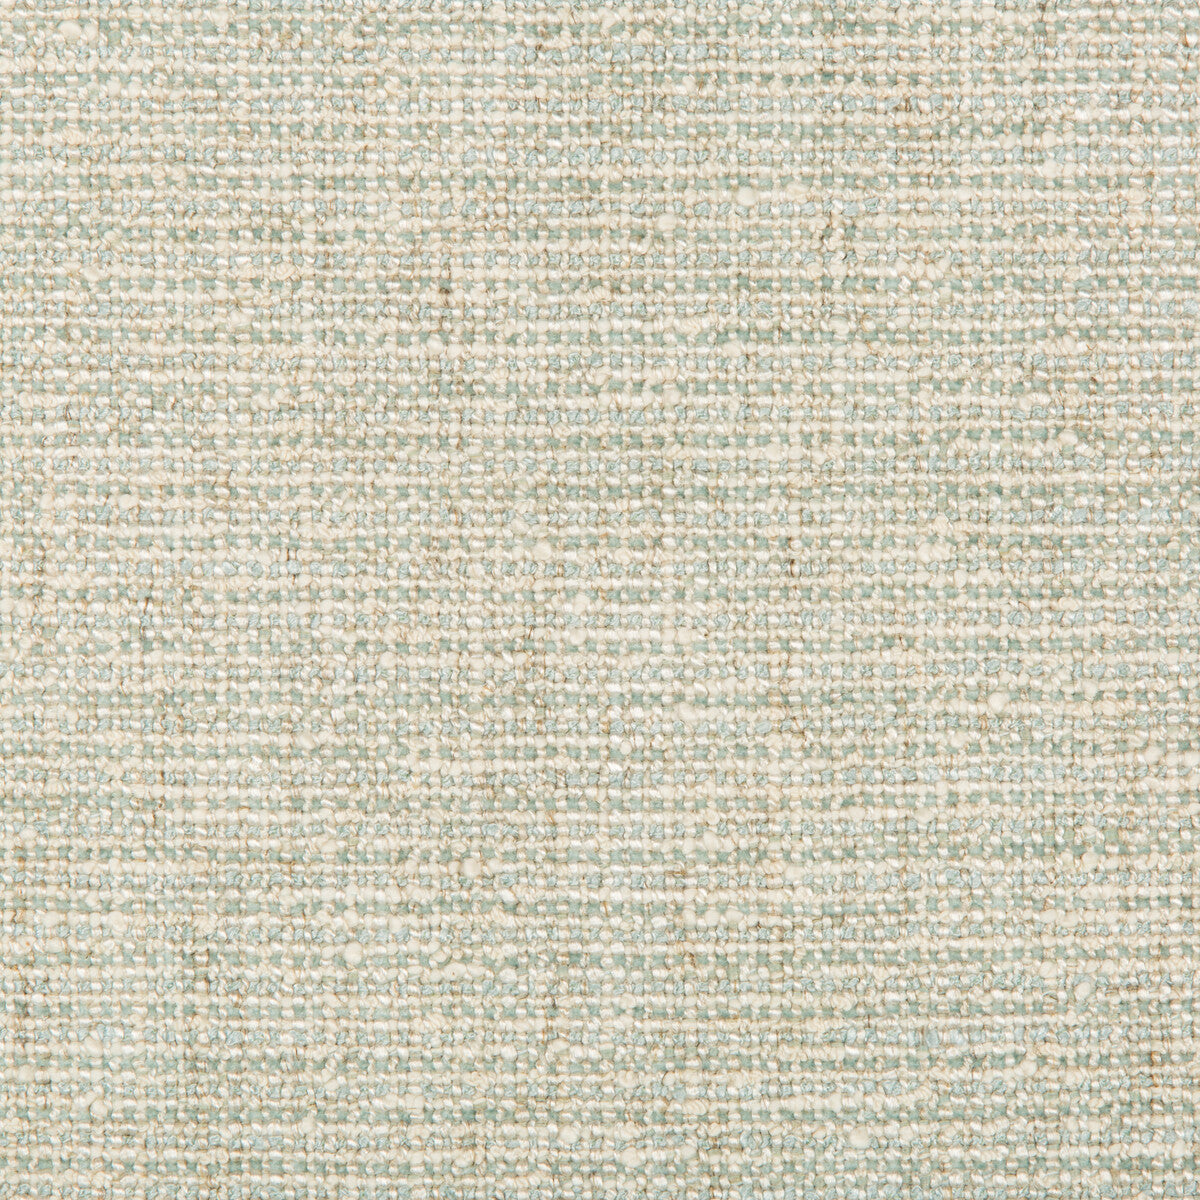 Varona fabric in seamist color - pattern 2017160.13.0 - by Lee Jofa in the Westport collection